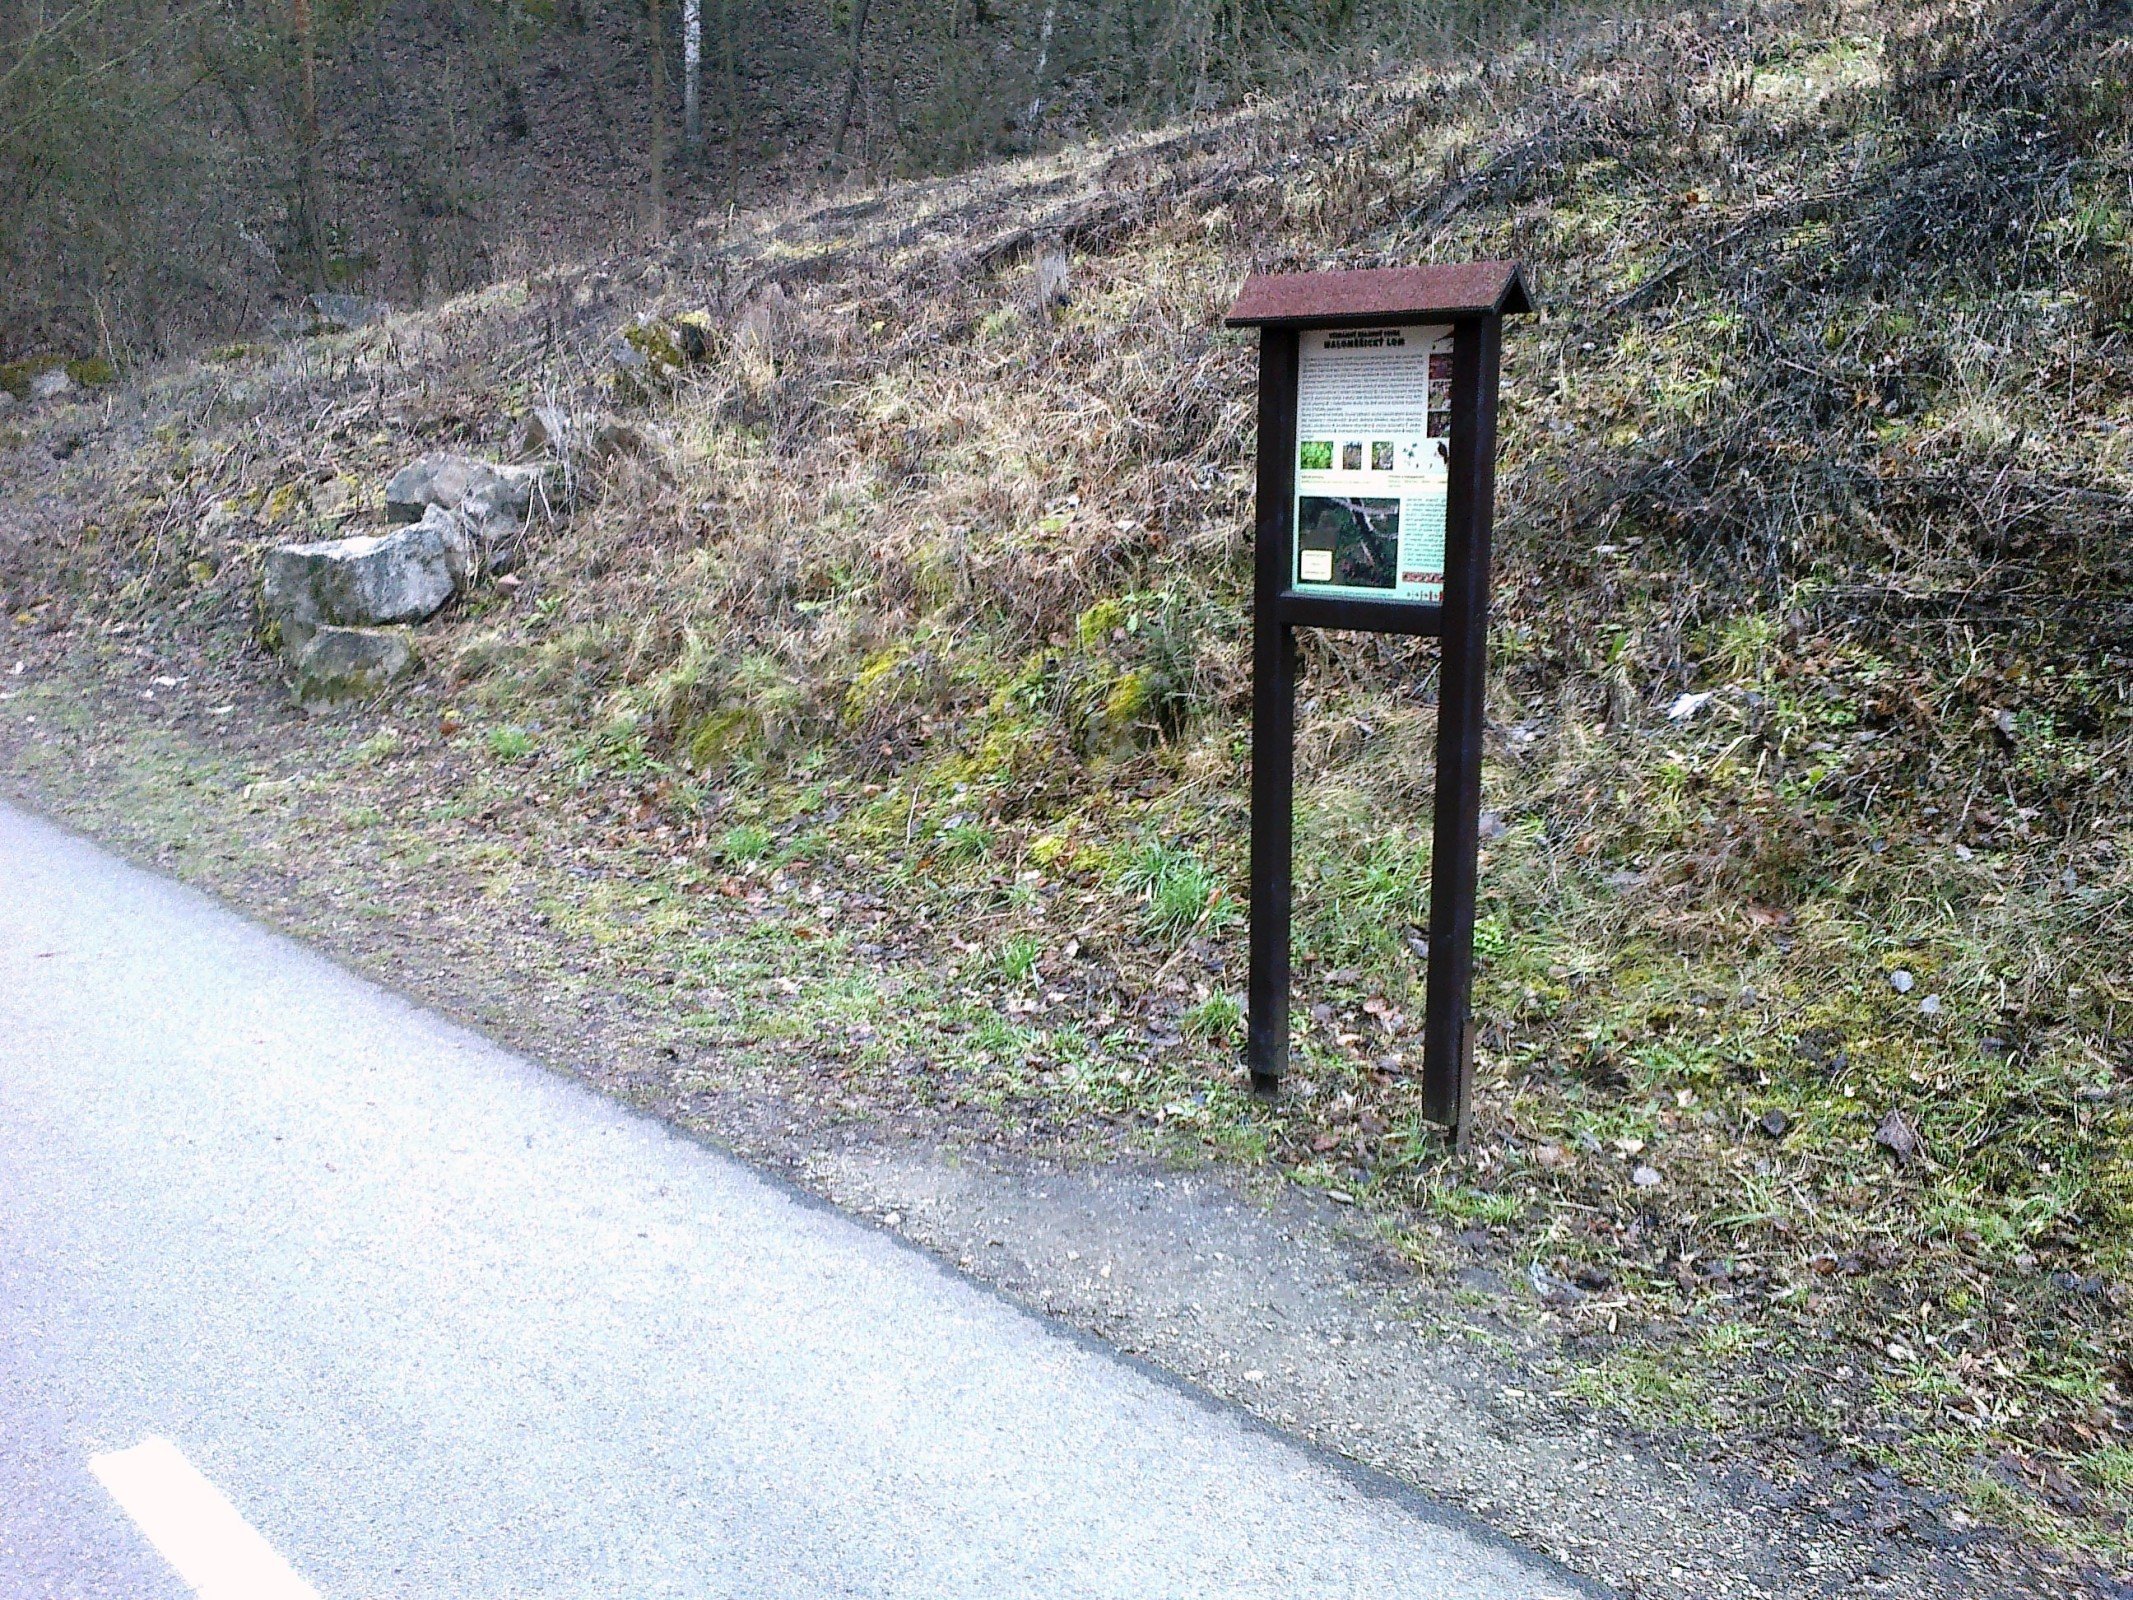 Information board at the quarry